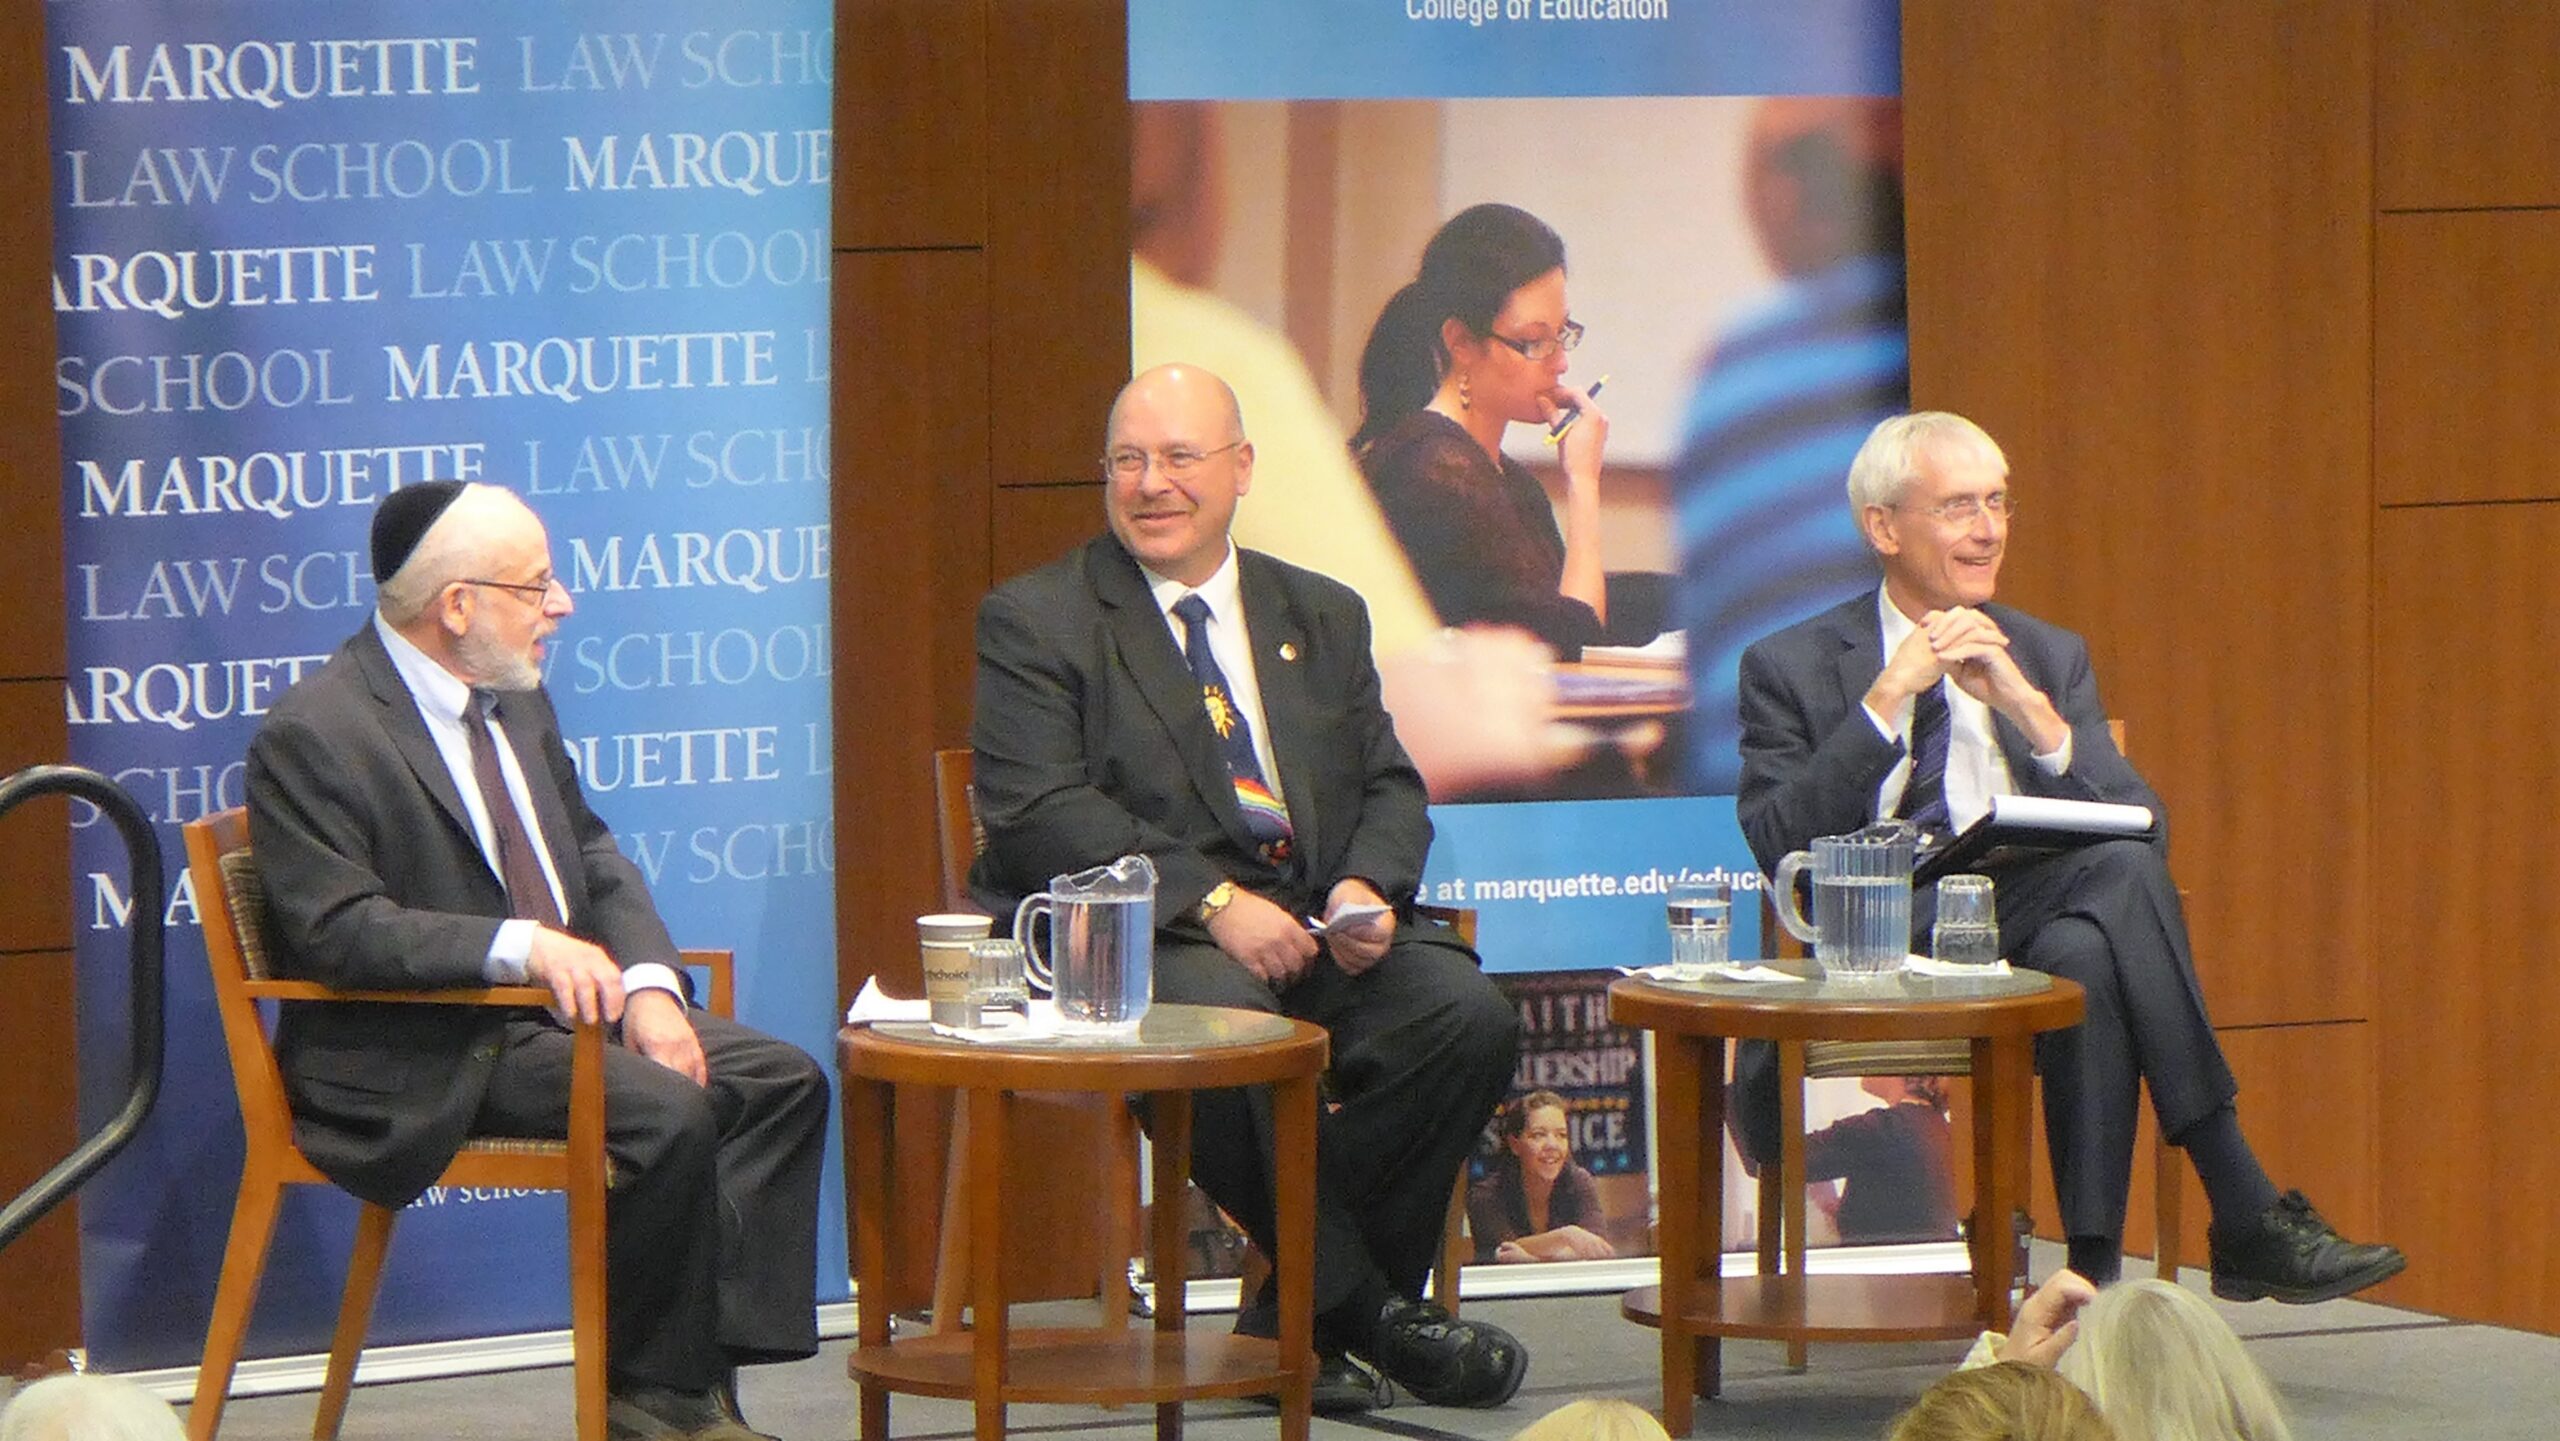 State School Superintendent Candidates Lowell Holtz and Tony Evers